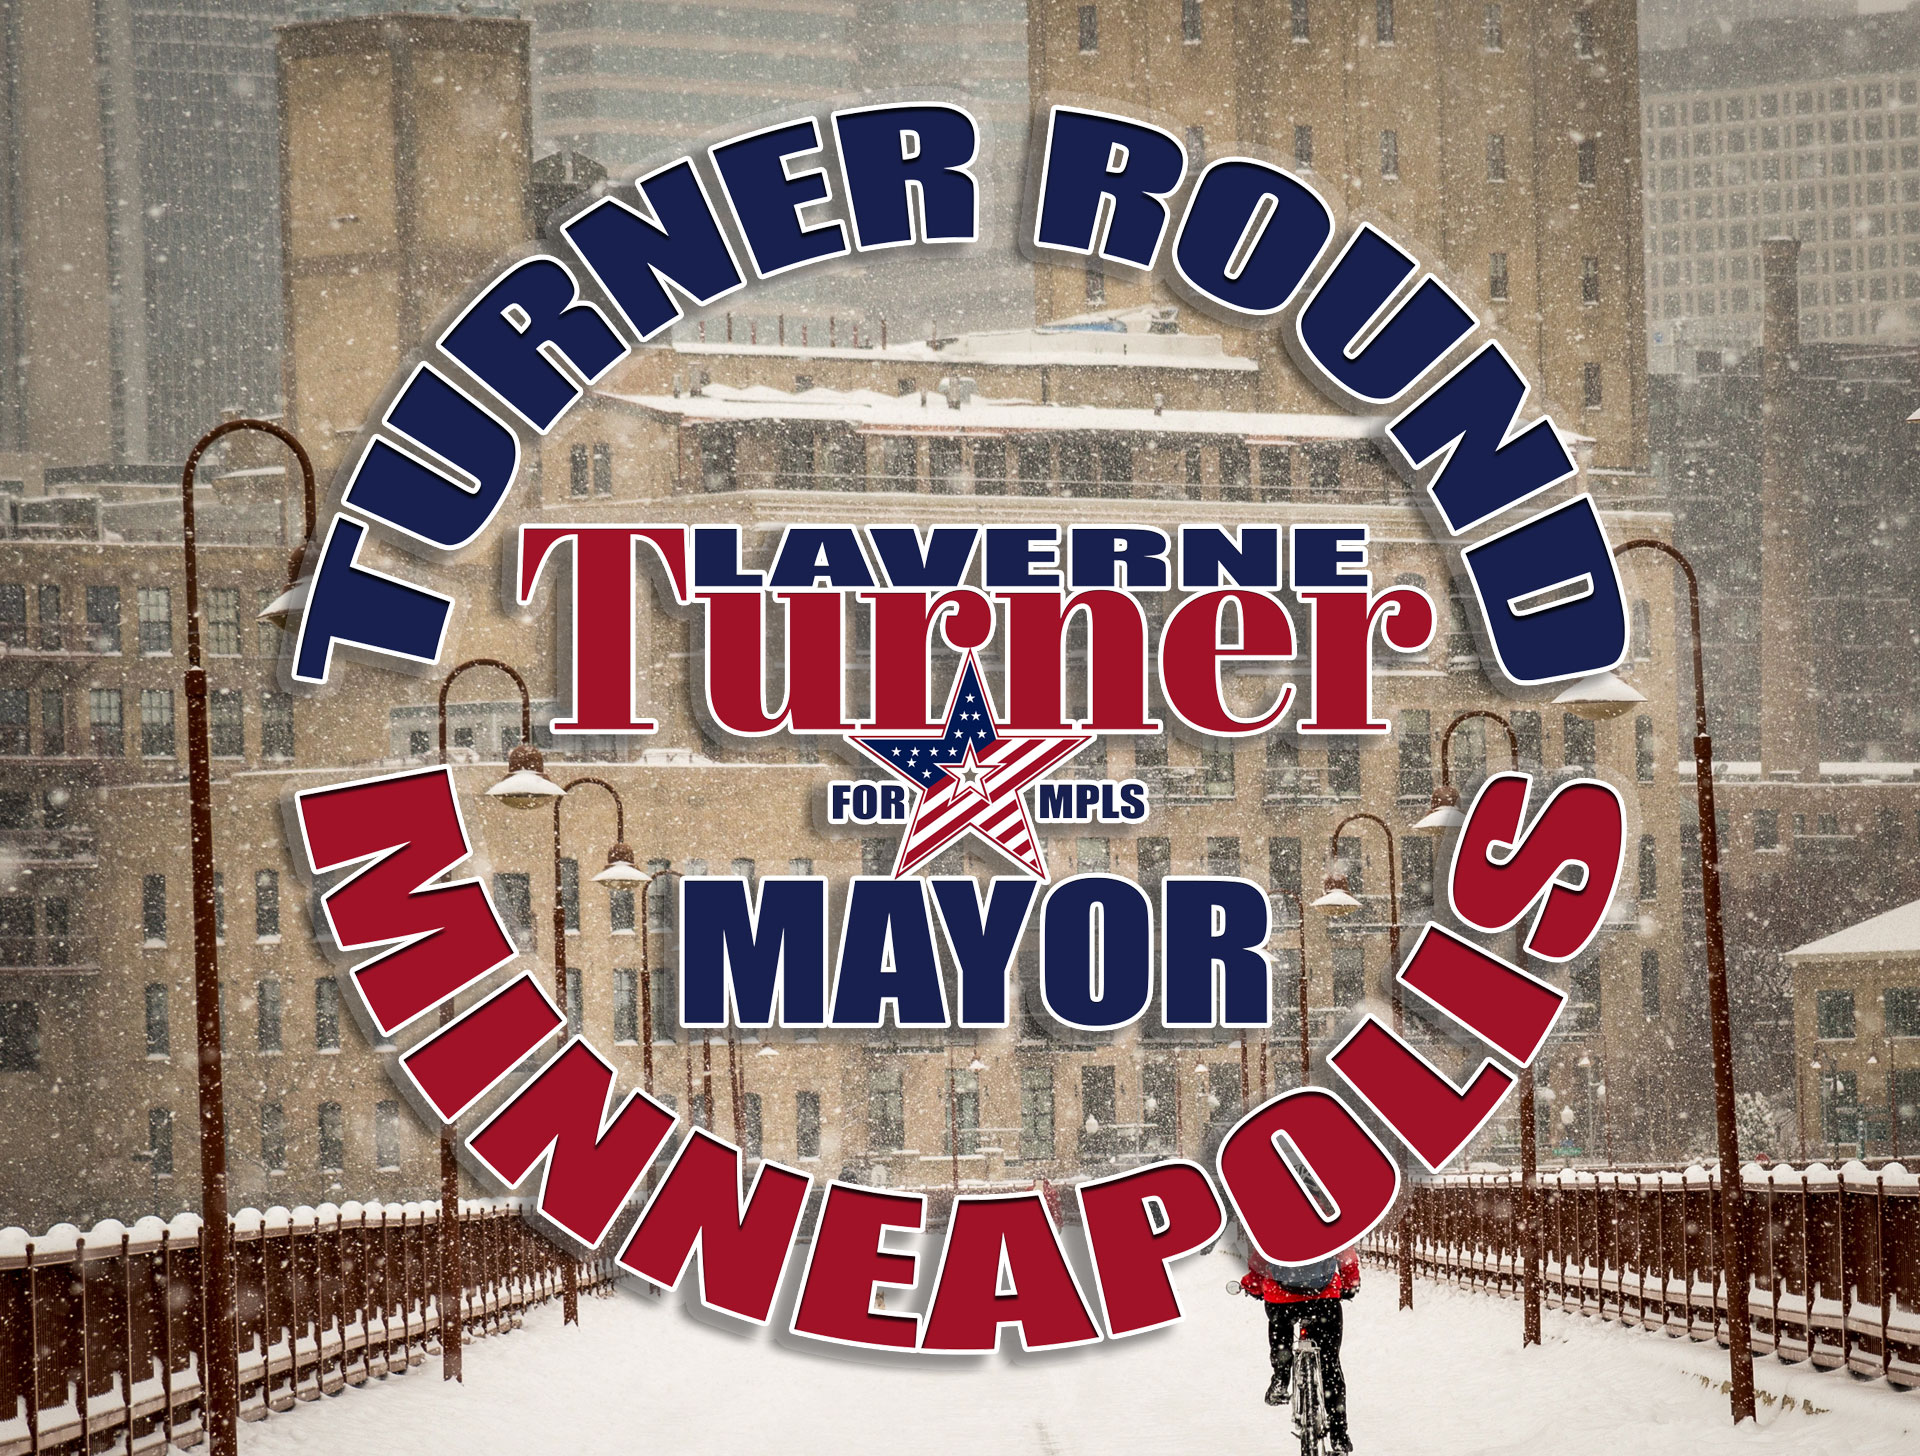 TurnerroundMPLS For A “Better and Brighter” Minneapolis for the 21st Century Laverne Turner for Minneapolis Mayor 2025